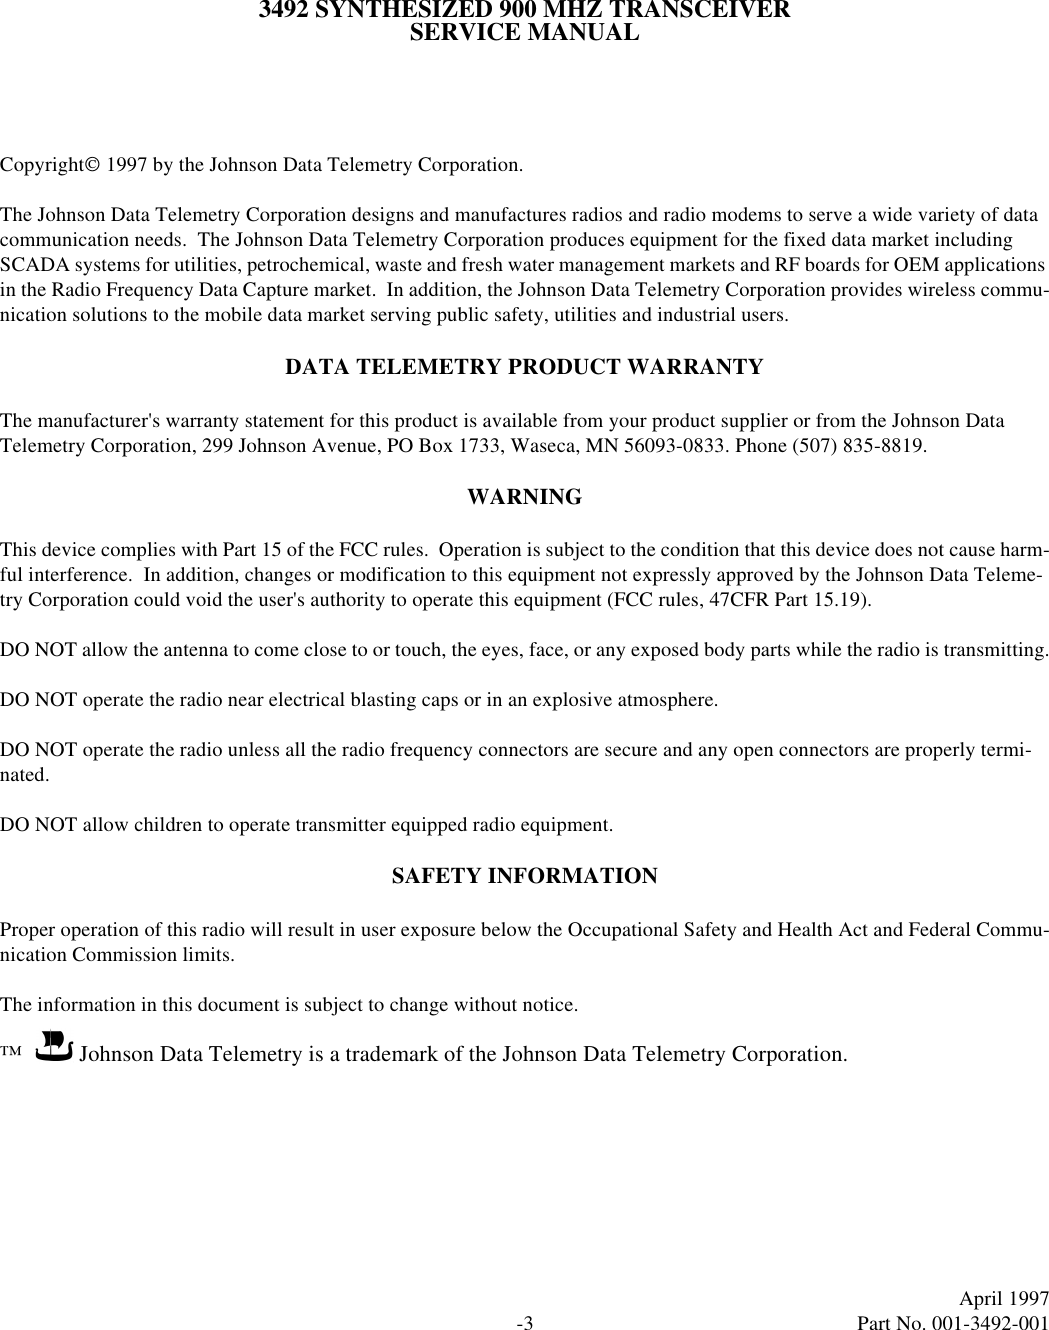 -3April 1997  Part No. 001-3492-0013492 SYNTHESIZED 900 MHZ TRANSCEIVERSERVICE MANUALCopyright 1997 by the Johnson Data Telemetry Corporation.The Johnson Data Telemetry Corporation designs and manufactures radios and radio modems to serve a wide variety of data communication needs.  The Johnson Data Telemetry Corporation produces equipment for the fixed data market including SCADA systems for utilities, petrochemical, waste and fresh water management markets and RF boards for OEM applications in the Radio Frequency Data Capture market.  In addition, the Johnson Data Telemetry Corporation provides wireless commu-nication solutions to the mobile data market serving public safety, utilities and industrial users.DATA TELEMETRY PRODUCT WARRANTYThe manufacturer&apos;s warranty statement for this product is available from your product supplier or from the Johnson Data Telemetry Corporation, 299 Johnson Avenue, PO Box 1733, Waseca, MN 56093-0833. Phone (507) 835-8819.WARNINGThis device complies with Part 15 of the FCC rules.  Operation is subject to the condition that this device does not cause harm-ful interference.  In addition, changes or modification to this equipment not expressly approved by the Johnson Data Teleme-try Corporation could void the user&apos;s authority to operate this equipment (FCC rules, 47CFR Part 15.19).DO NOT allow the antenna to come close to or touch, the eyes, face, or any exposed body parts while the radio is transmitting.DO NOT operate the radio near electrical blasting caps or in an explosive atmosphere.DO NOT operate the radio unless all the radio frequency connectors are secure and any open connectors are properly termi-nated.DO NOT allow children to operate transmitter equipped radio equipment.SAFETY INFORMATIONProper operation of this radio will result in user exposure below the Occupational Safety and Health Act and Federal Commu-nication Commission limits.The information in this document is subject to change without notice.™          Johnson Data Telemetry is a trademark of the Johnson Data Telemetry Corporation.